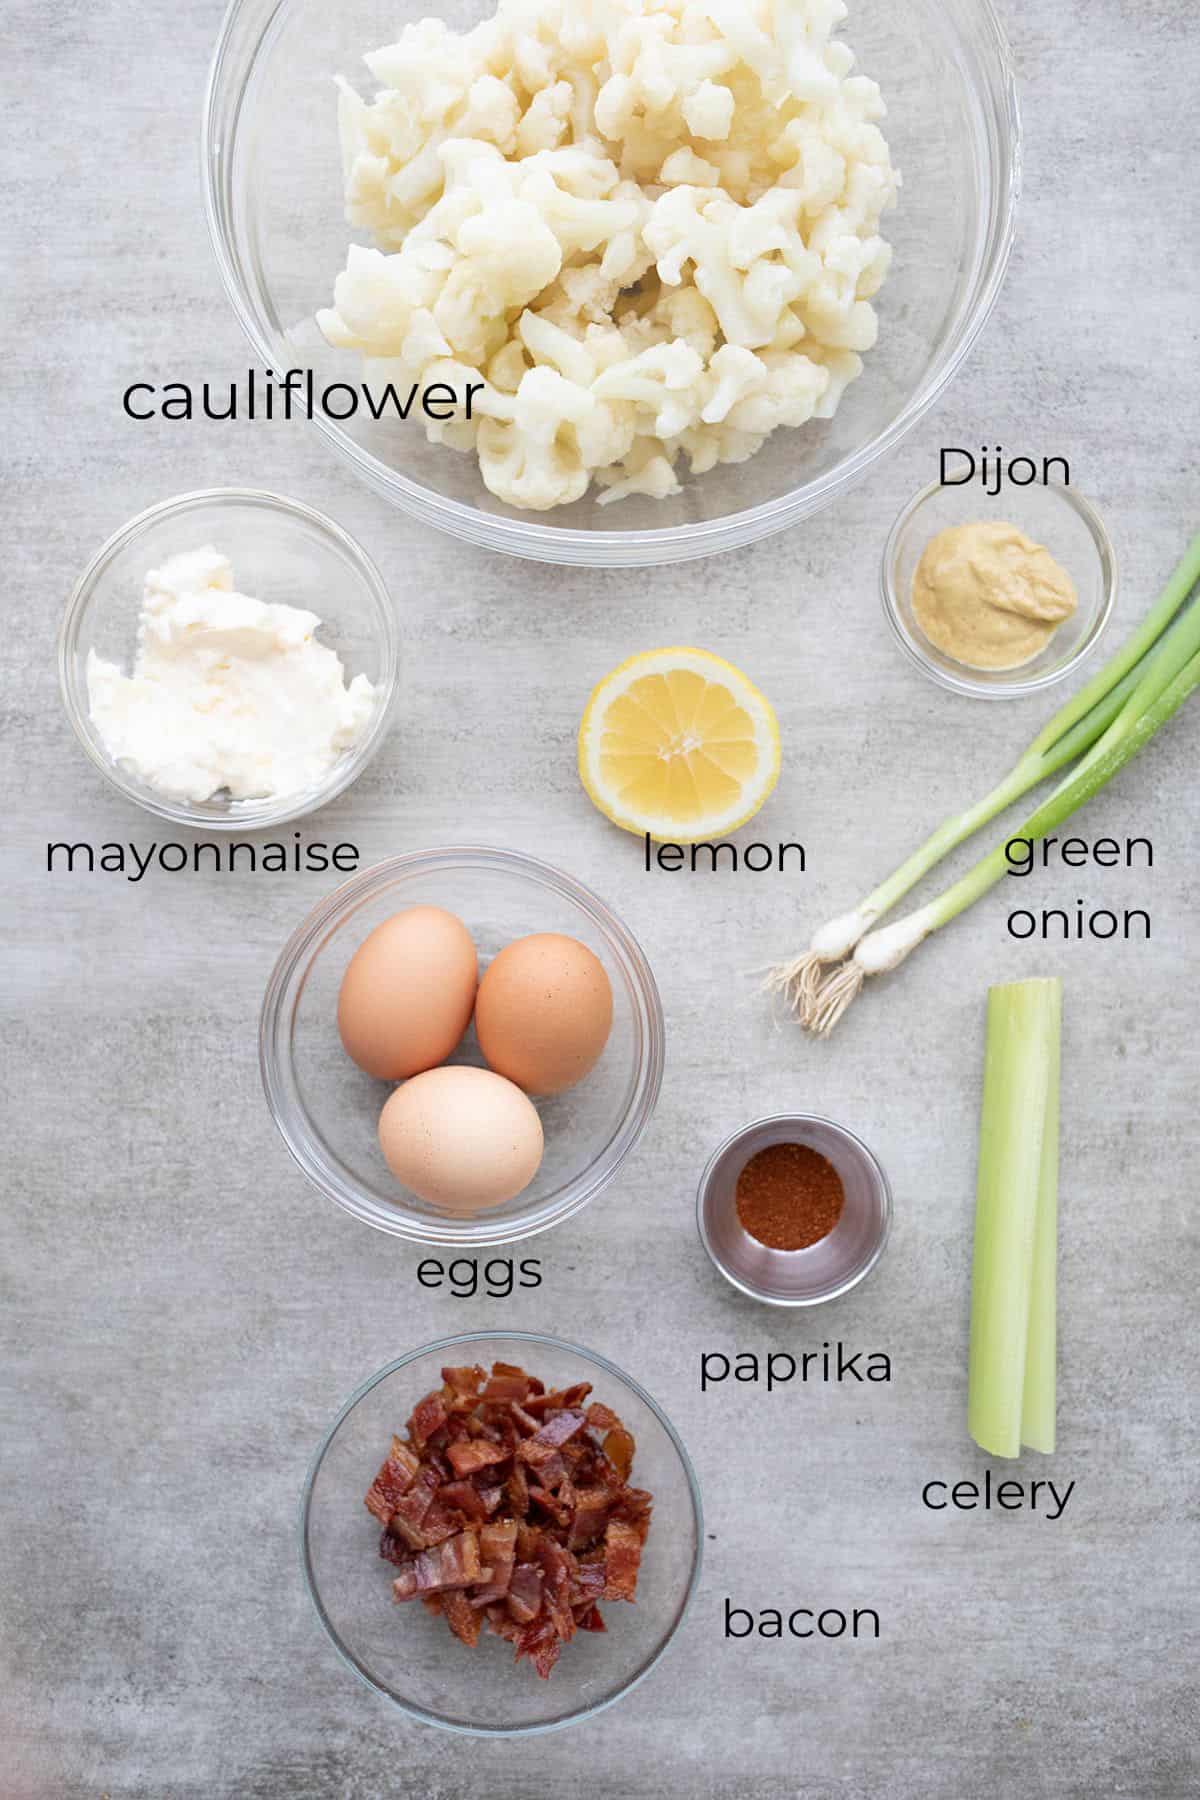 Top down image of ingredients needed for Cauliflower Potato Salad.